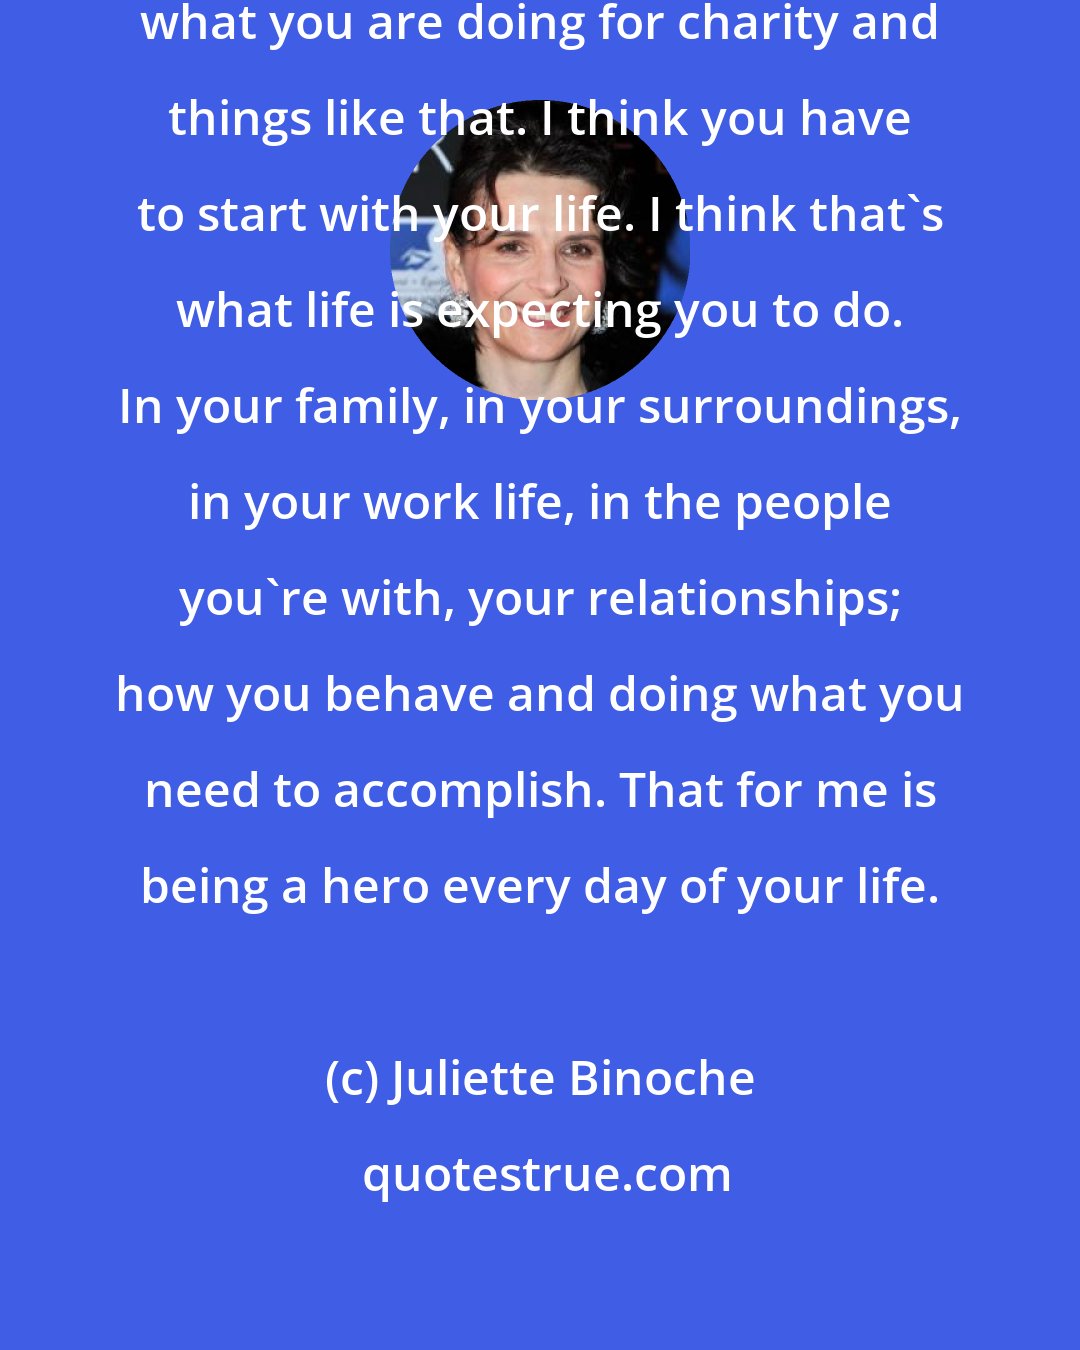 Juliette Binoche: You have to be very cautious about what you are doing for charity and things like that. I think you have to start with your life. I think that's what life is expecting you to do. In your family, in your surroundings, in your work life, in the people you're with, your relationships; how you behave and doing what you need to accomplish. That for me is being a hero every day of your life.